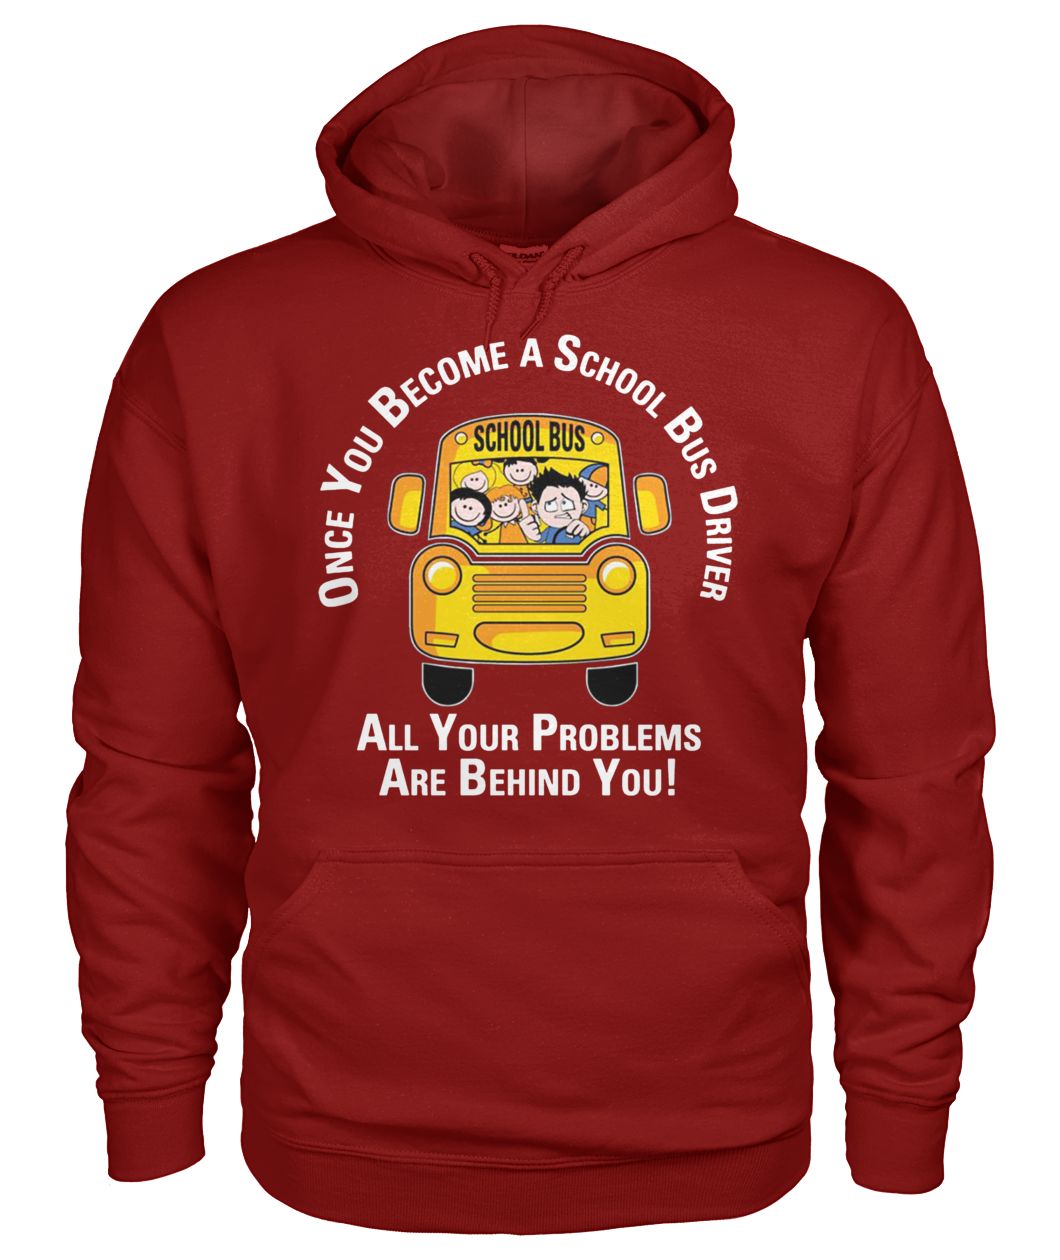 Once you become a school bus driver all your problem are behind you gildan hoodie